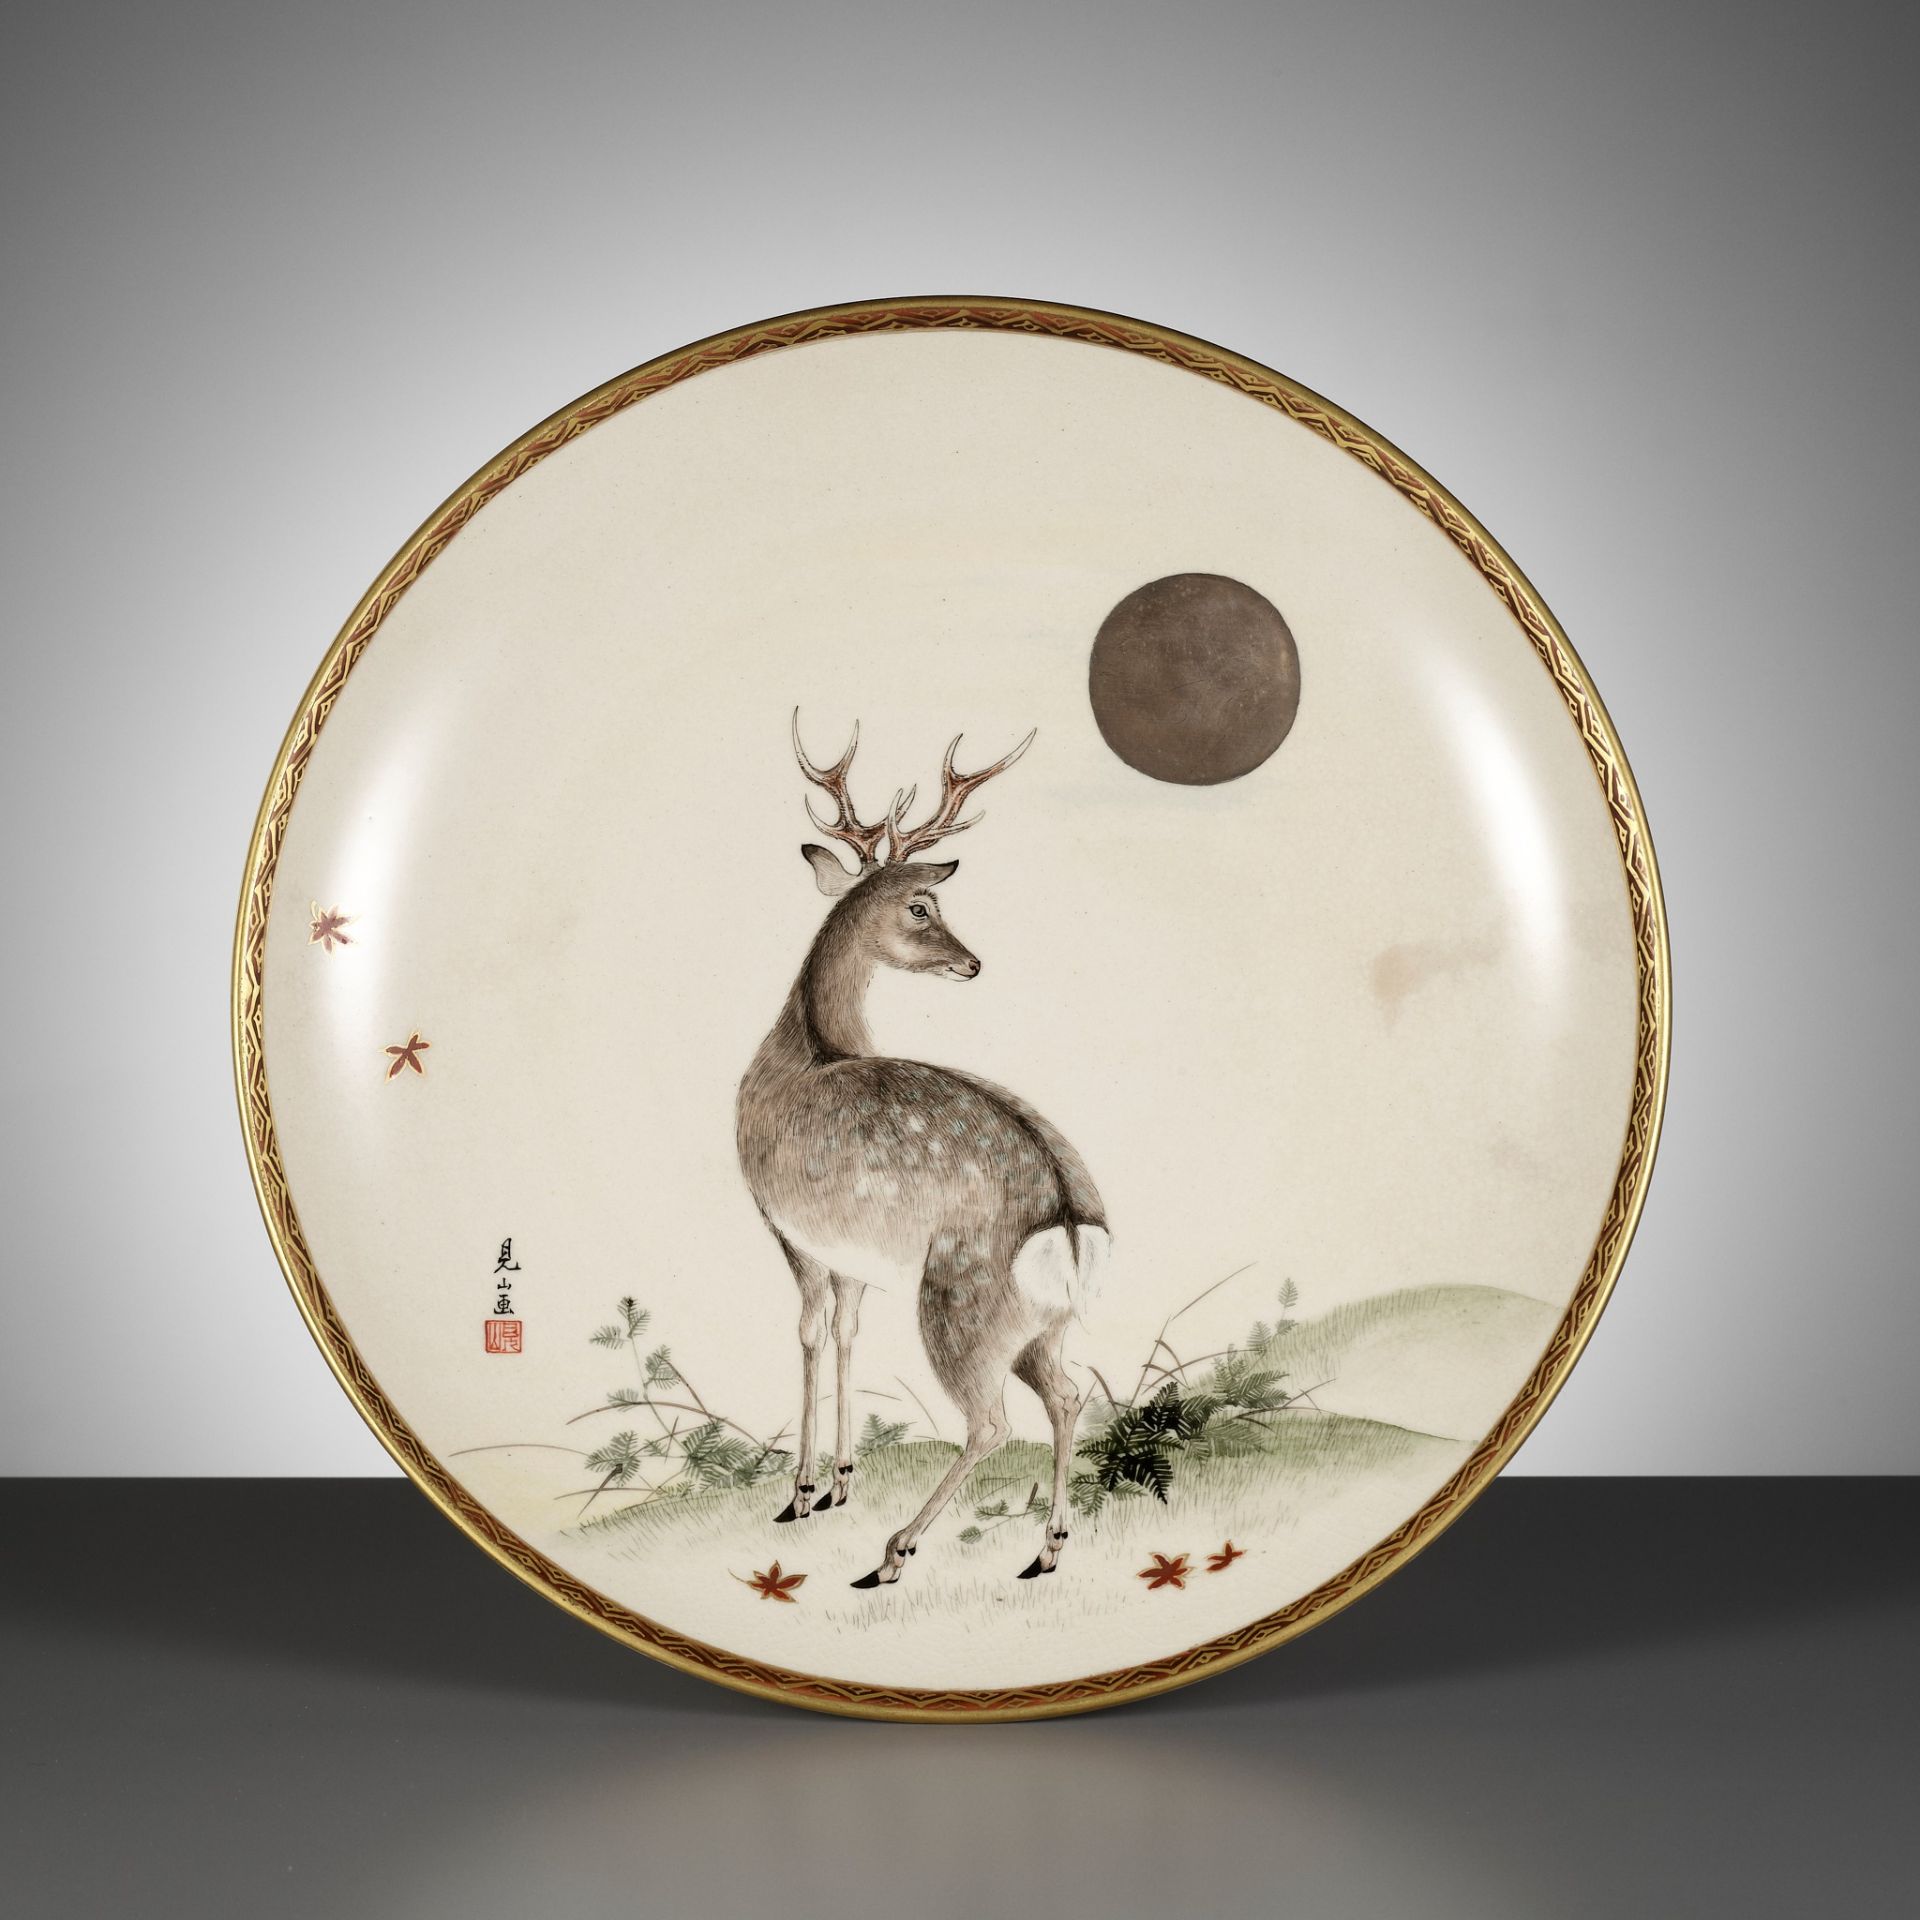 A FINE SATSUMA DISH WITH AN AUTUMNAL SCENE DEPICTING A DEER AND MOON, AFTER A DESIGN BY OGATA KENZAN